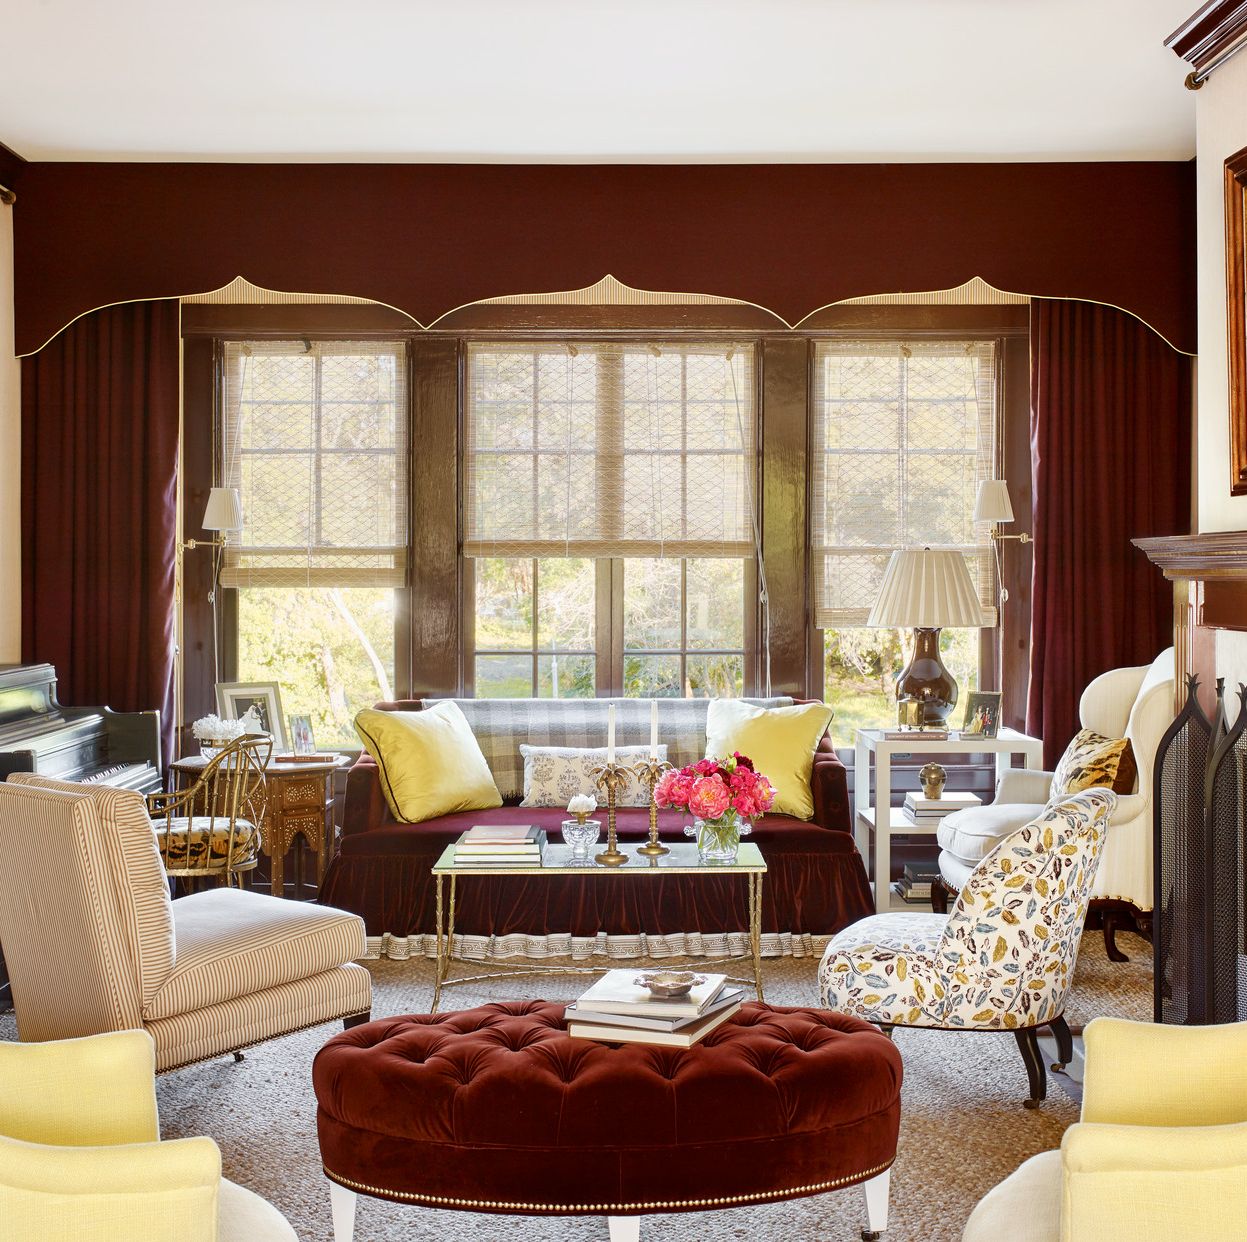 yellow color schemes for living room